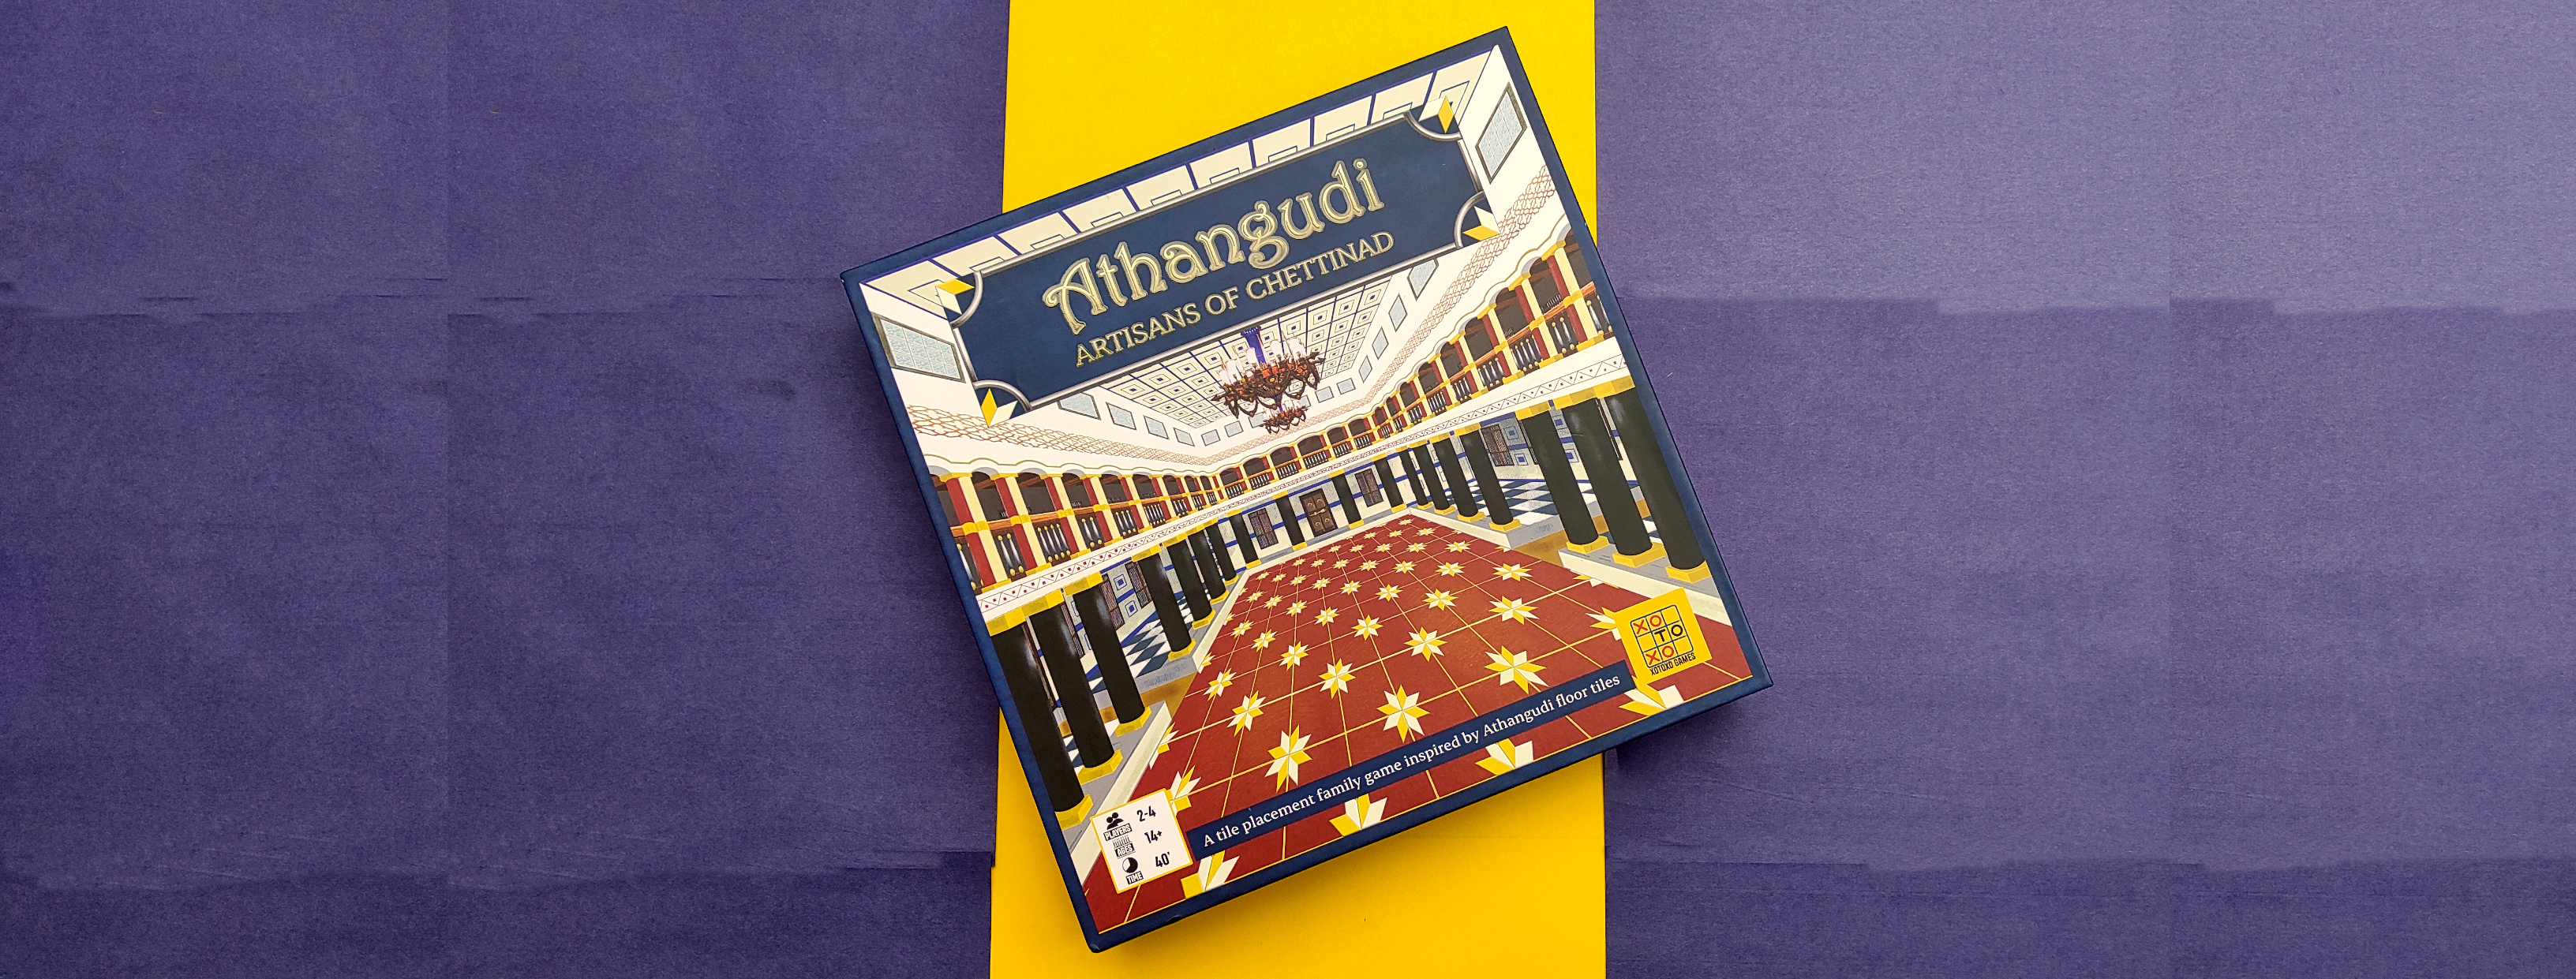 Box of the boardgame Athangudi: Artisans of Chettinad placed at an angle on a background of navy blue and yellow